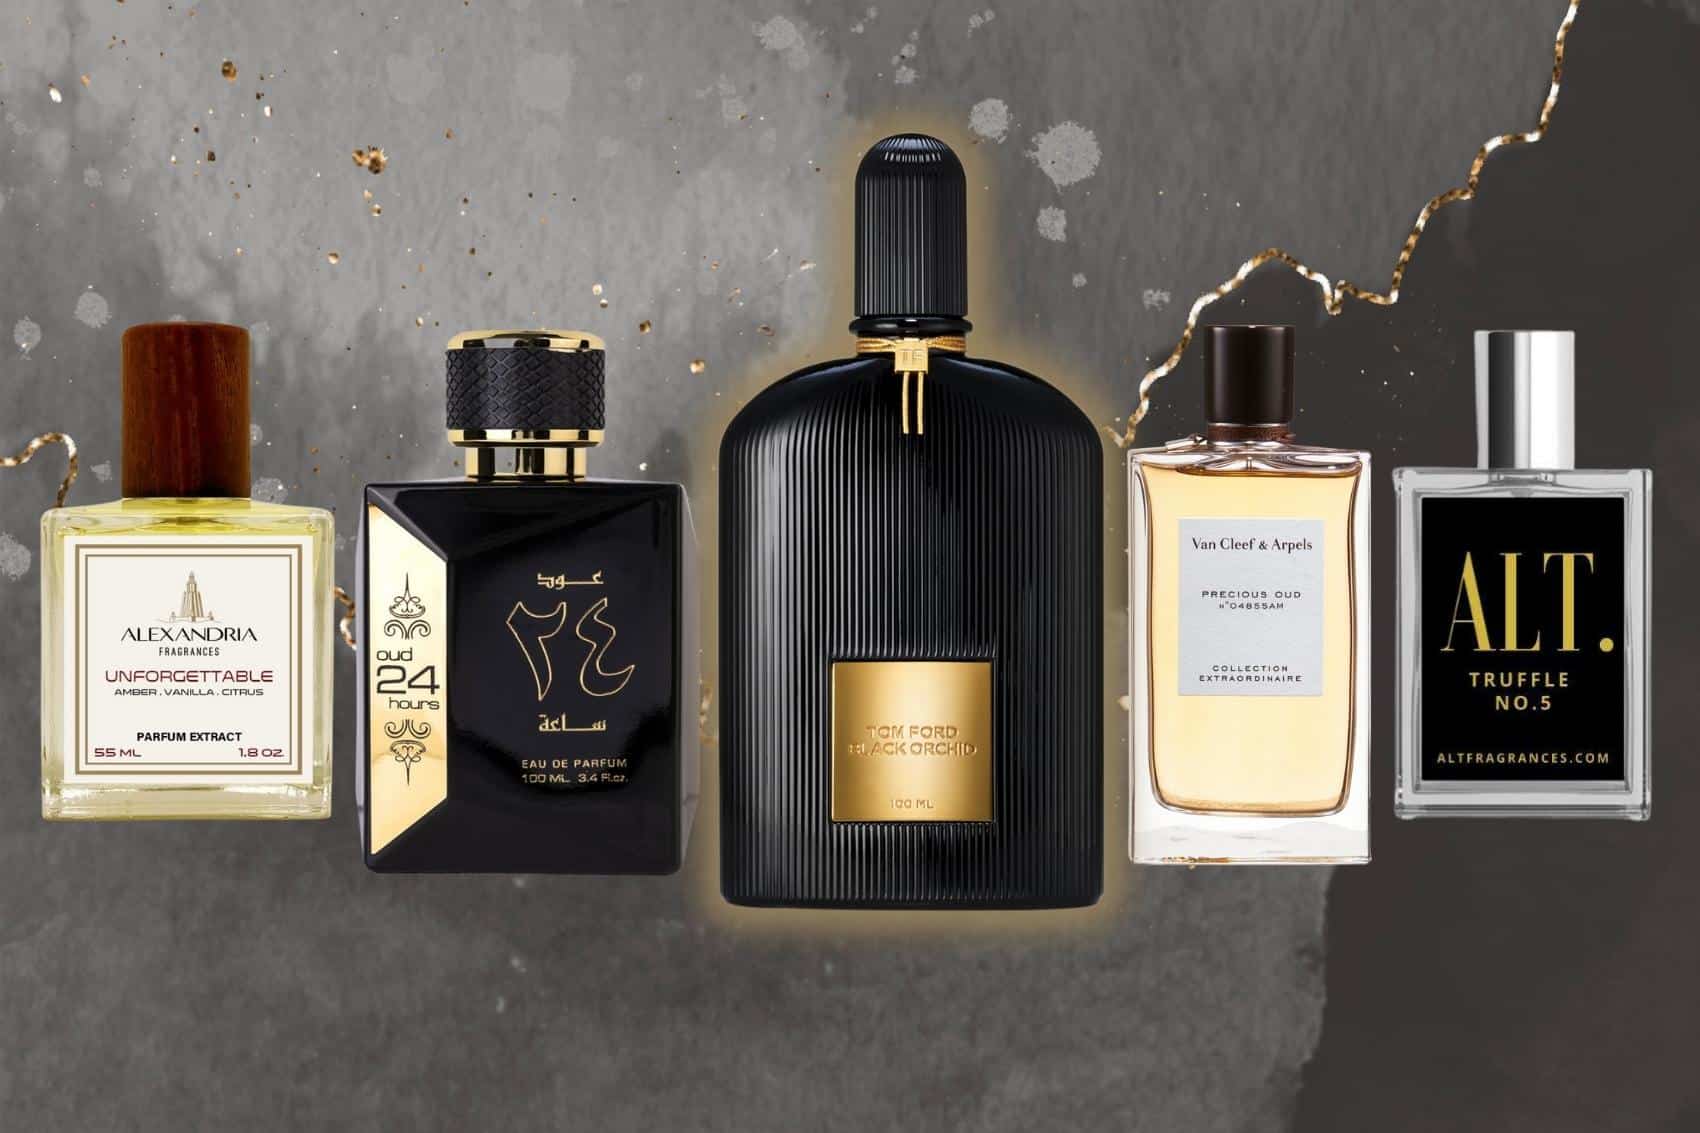 Arriba 43+ imagen tom ford black orchid perfume dupe